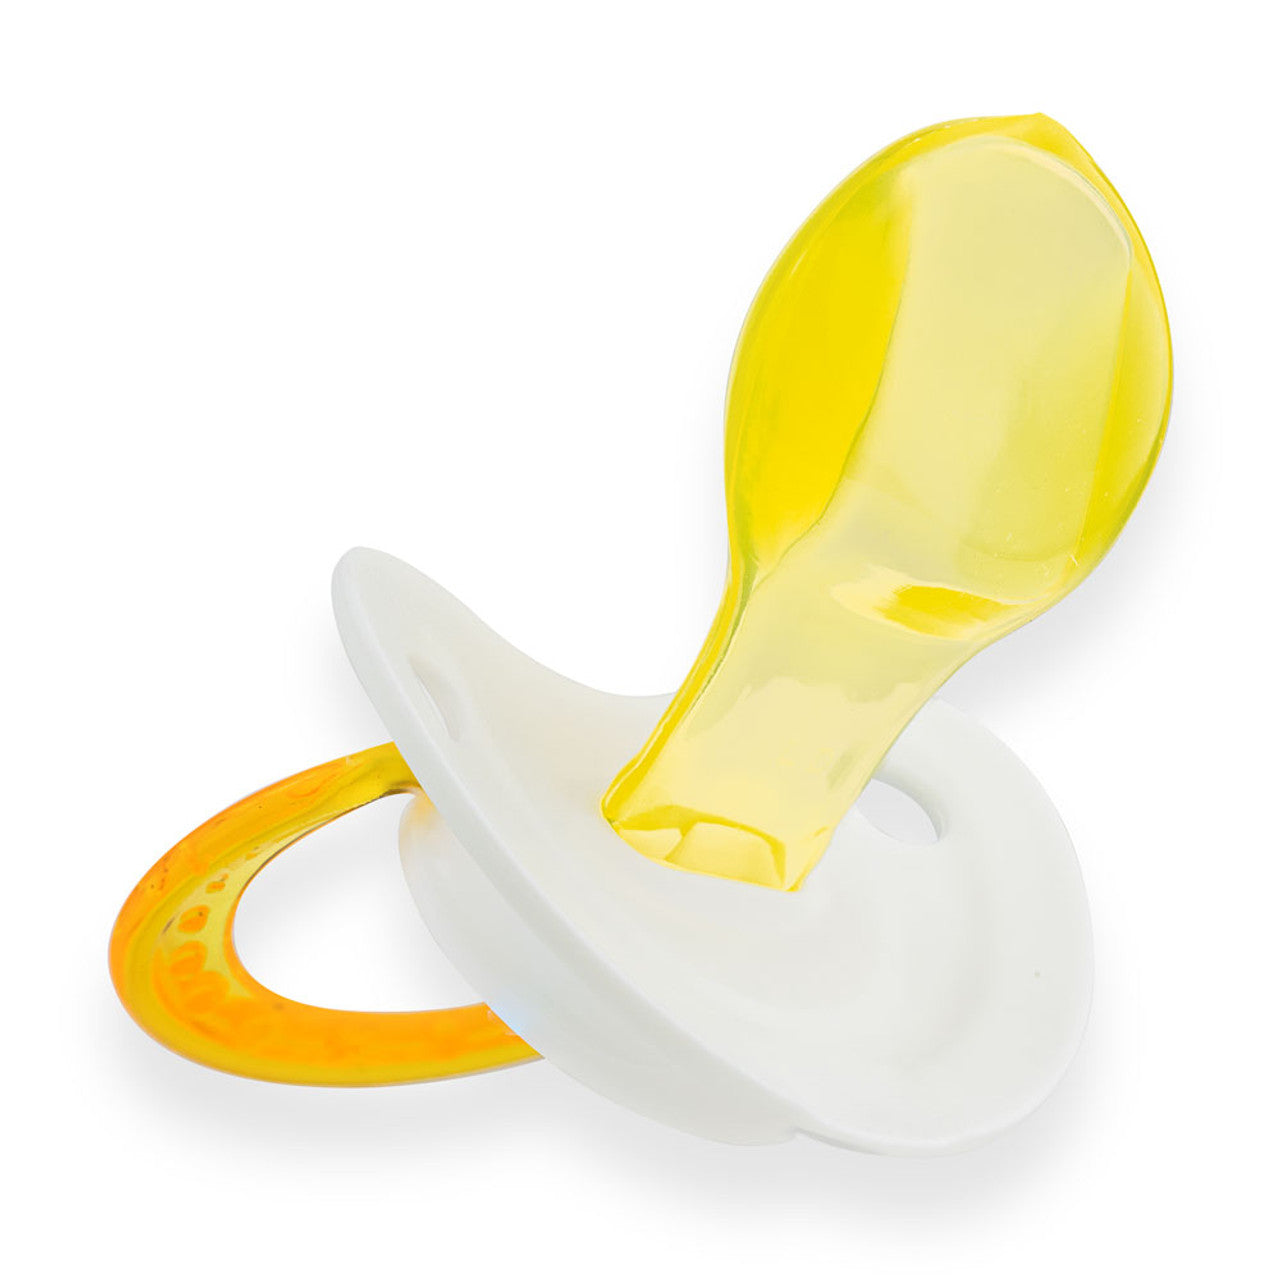 Pacifier Addict - Small Shield - Crystal Adult Pacifier